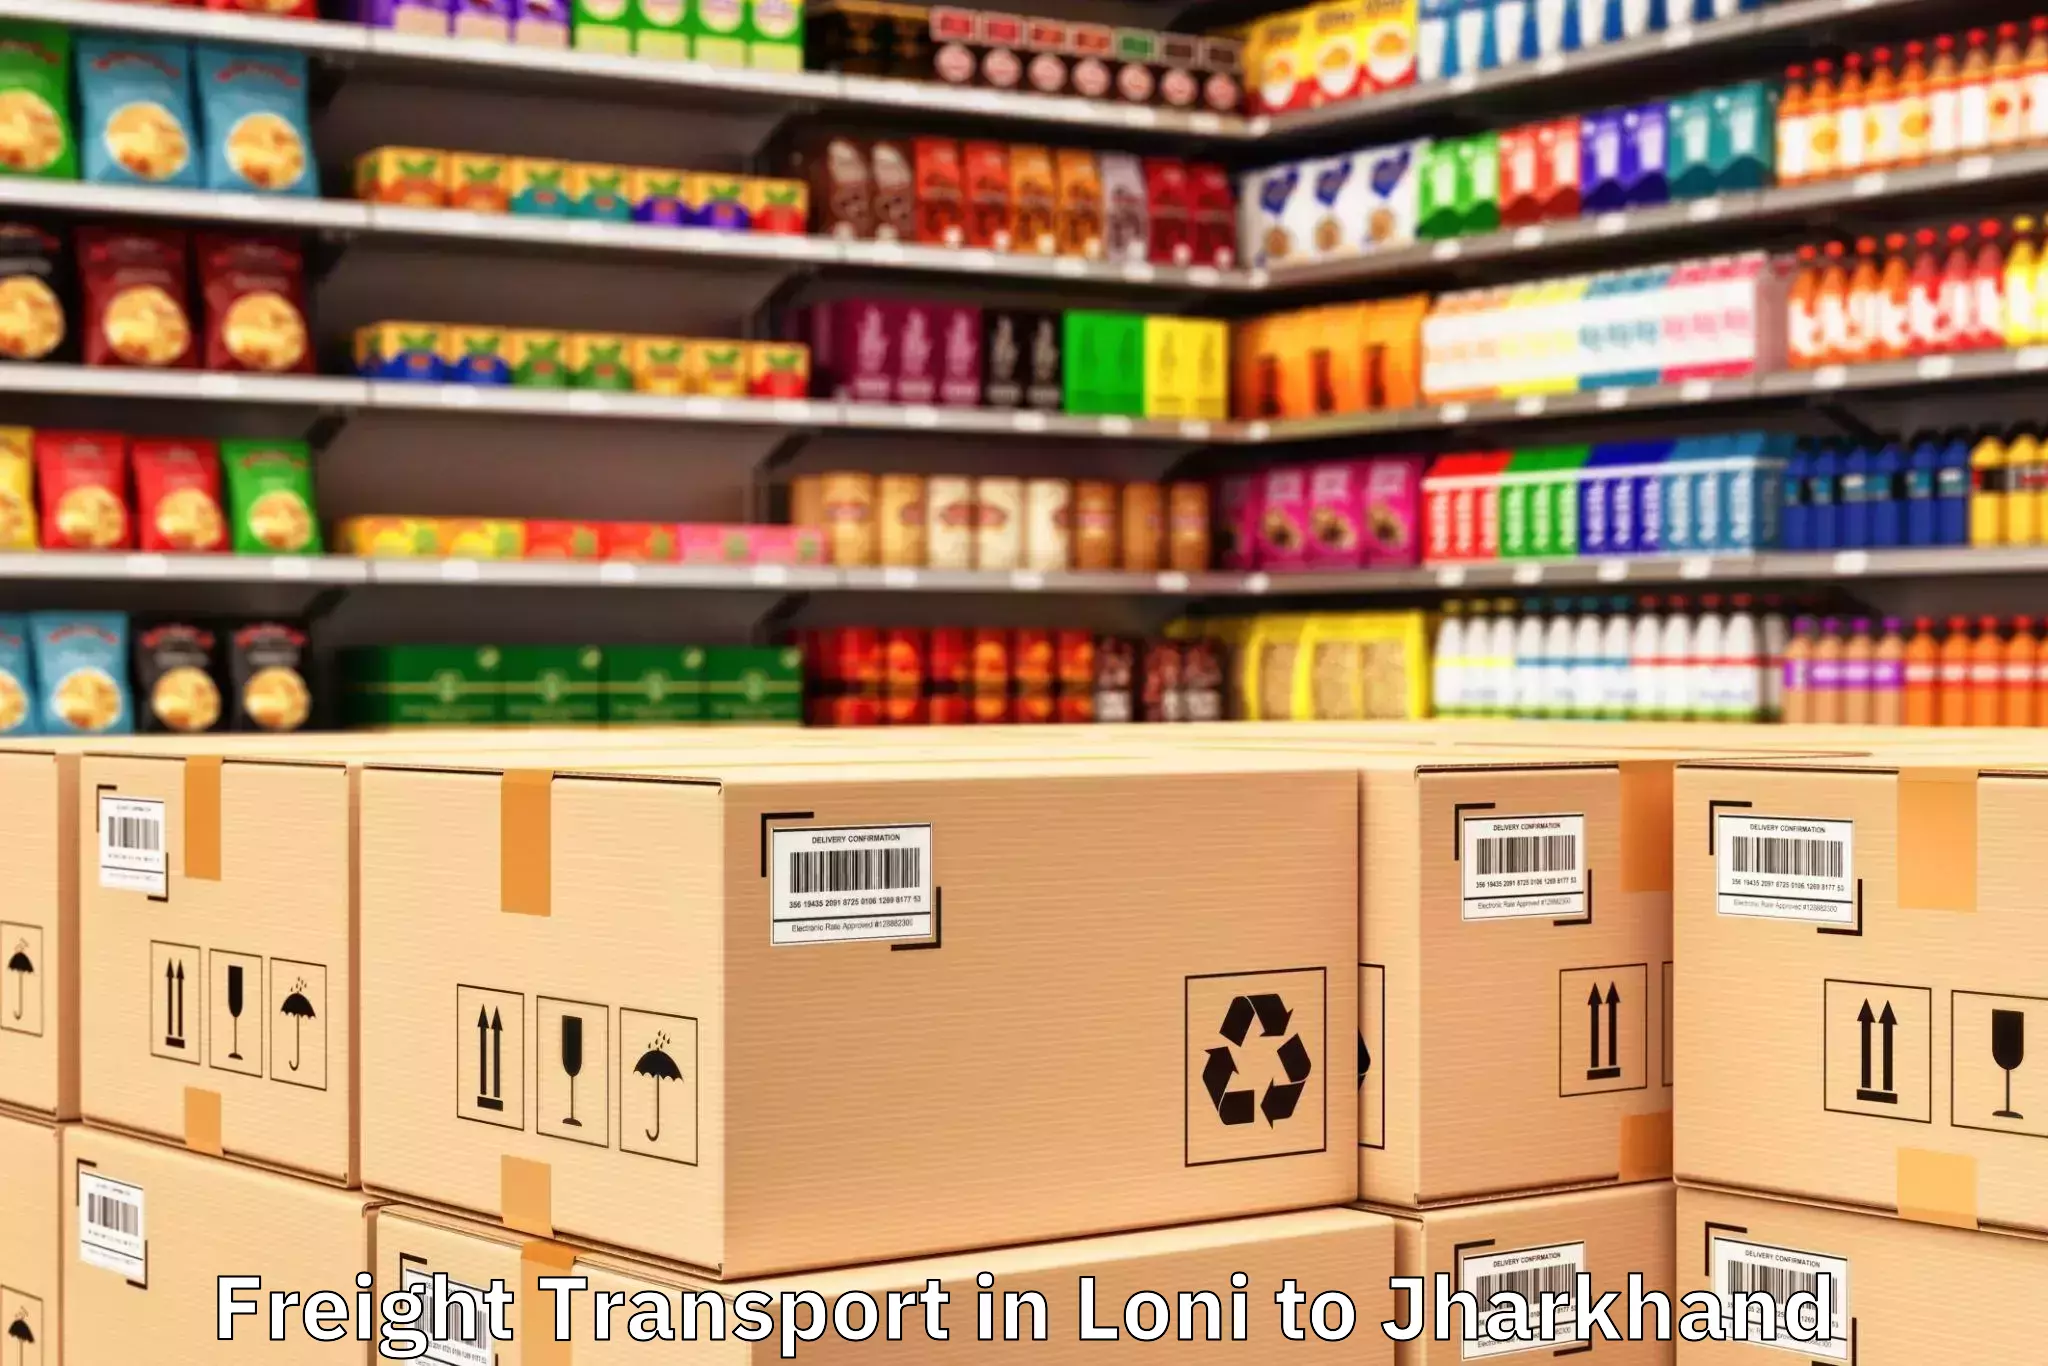 Discover Loni to Jharkhand Freight Transport